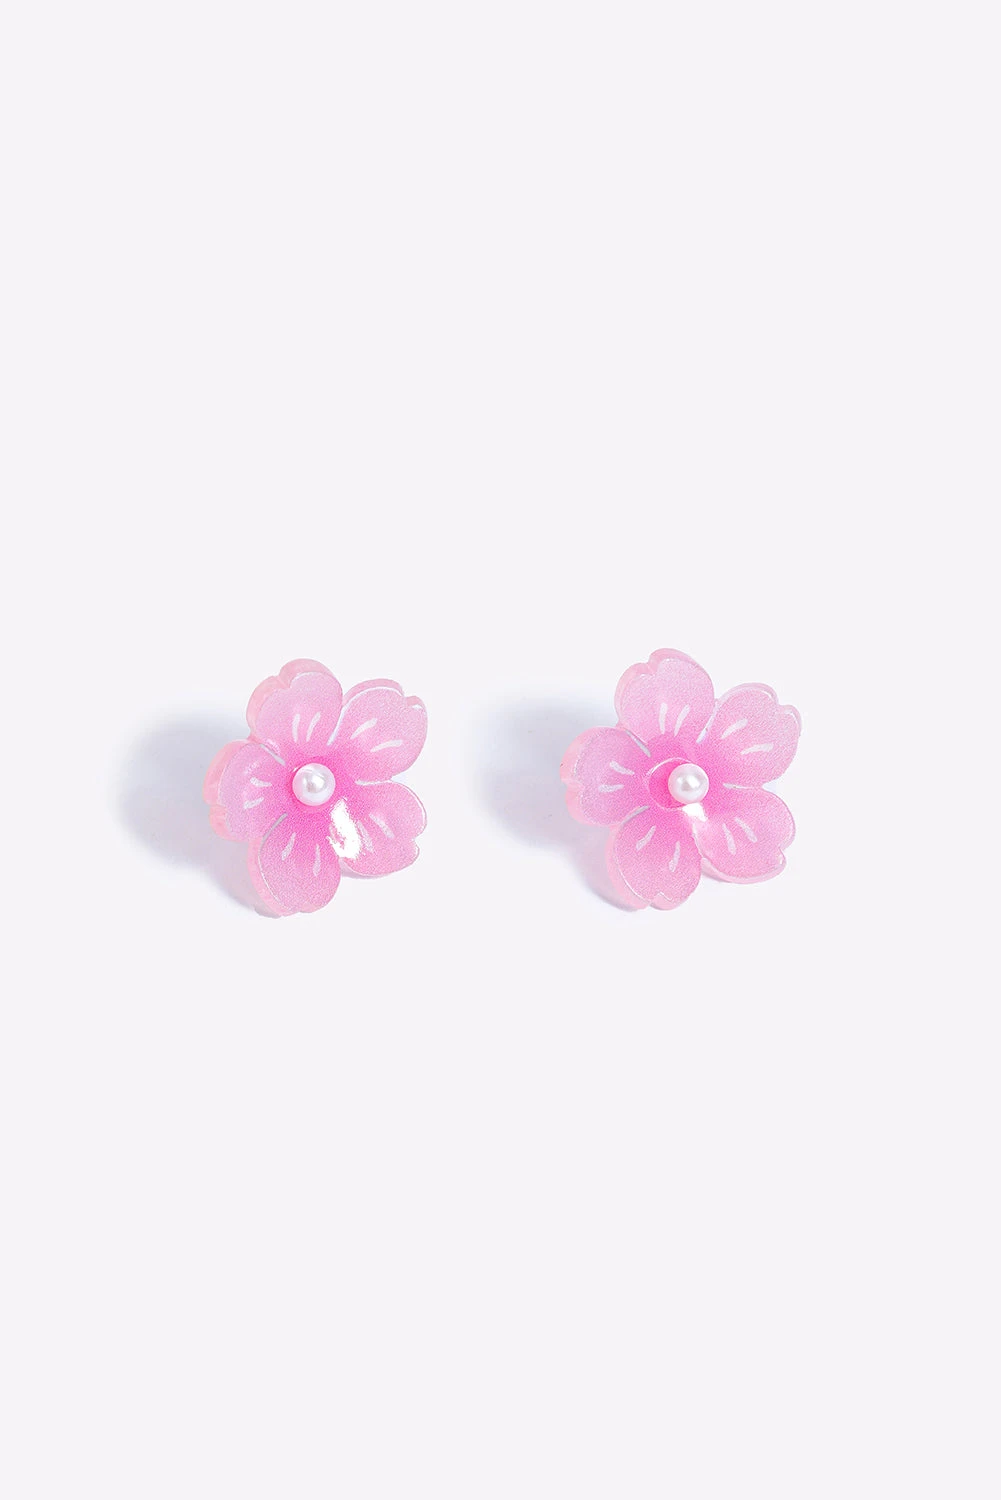 Acrylic Pink Cherry Blossom Stud Earrings $ 8.99 - Evaless